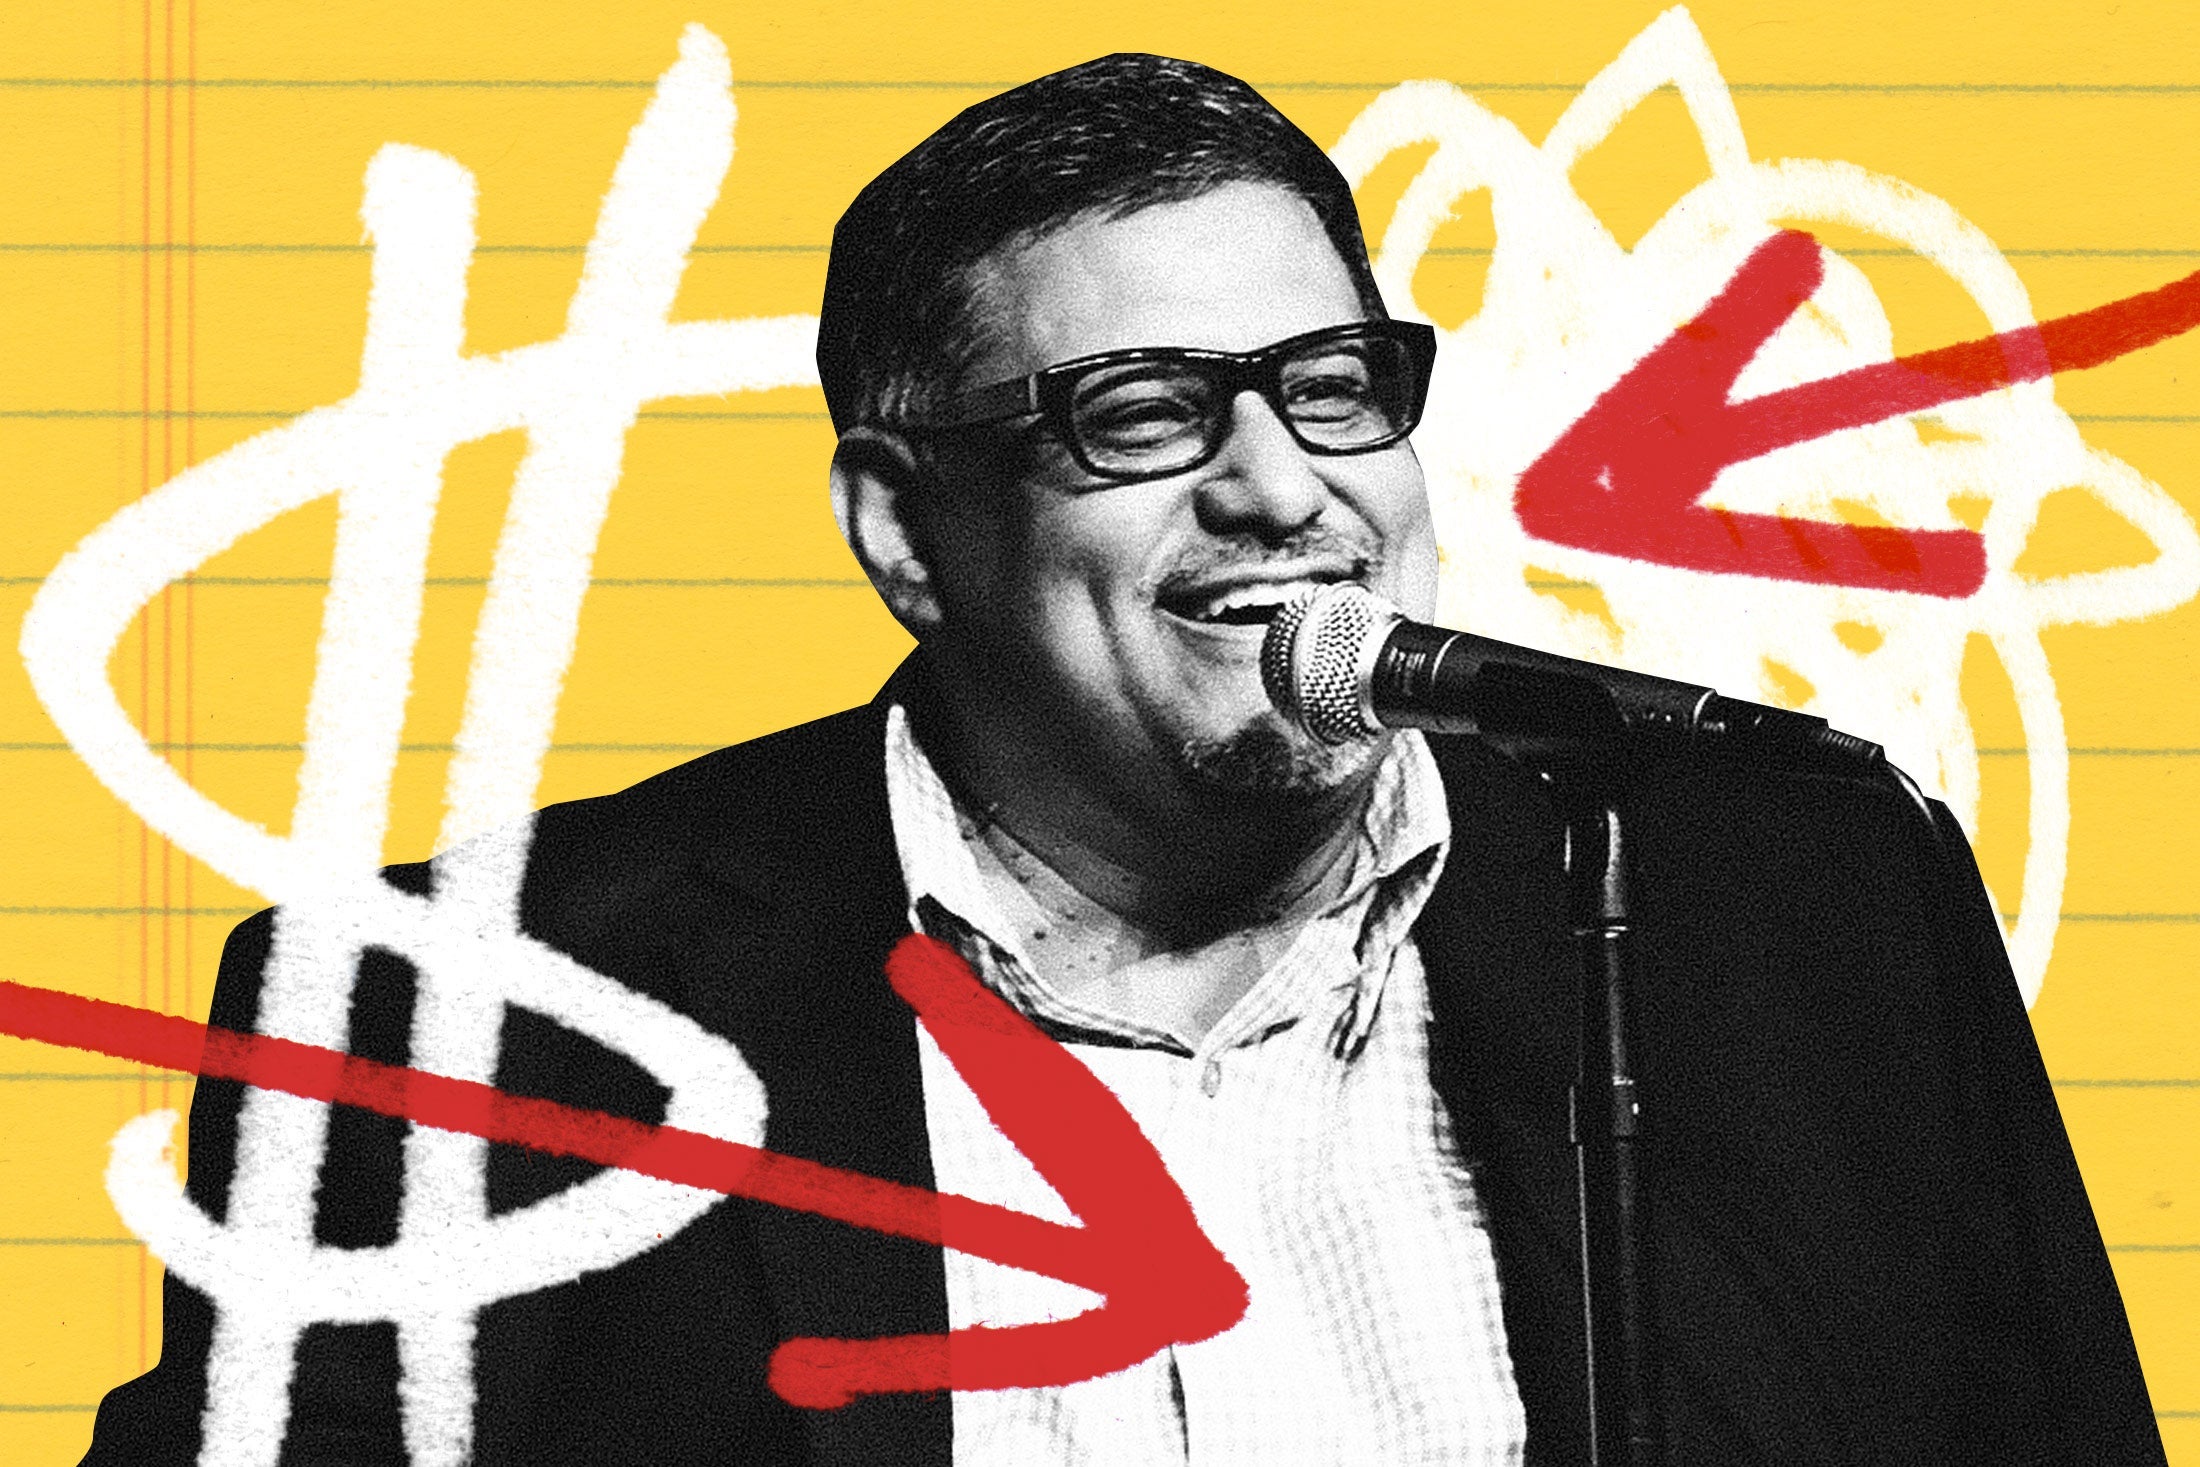 Joe Loya, smiling at a microphone, overlaid onto a yellow paper background flanked by arrows and dollar signs.